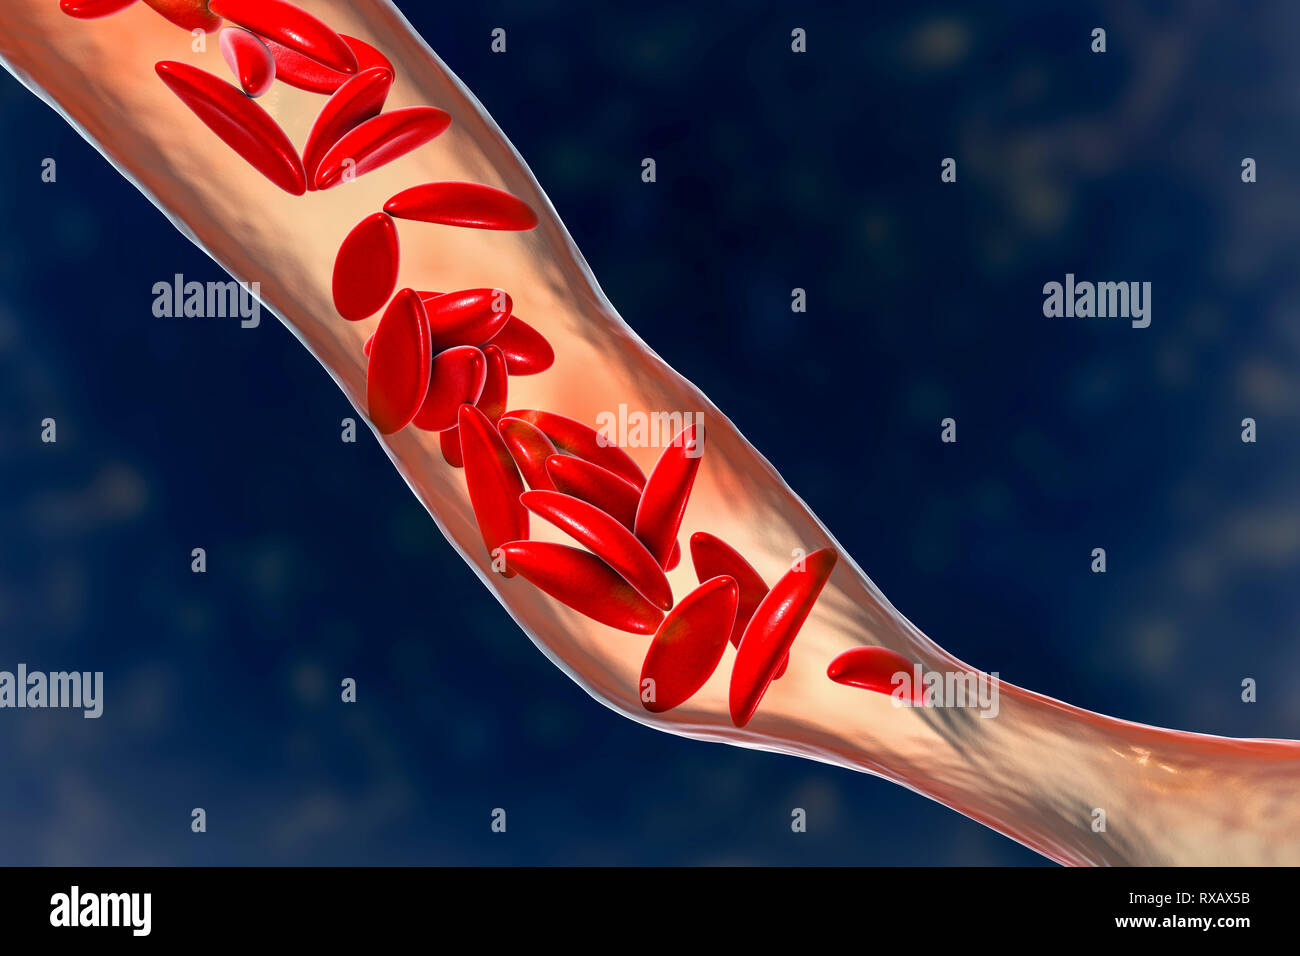 Blood vessel blocked in sickle cell anaemia, illustration Stock Photo